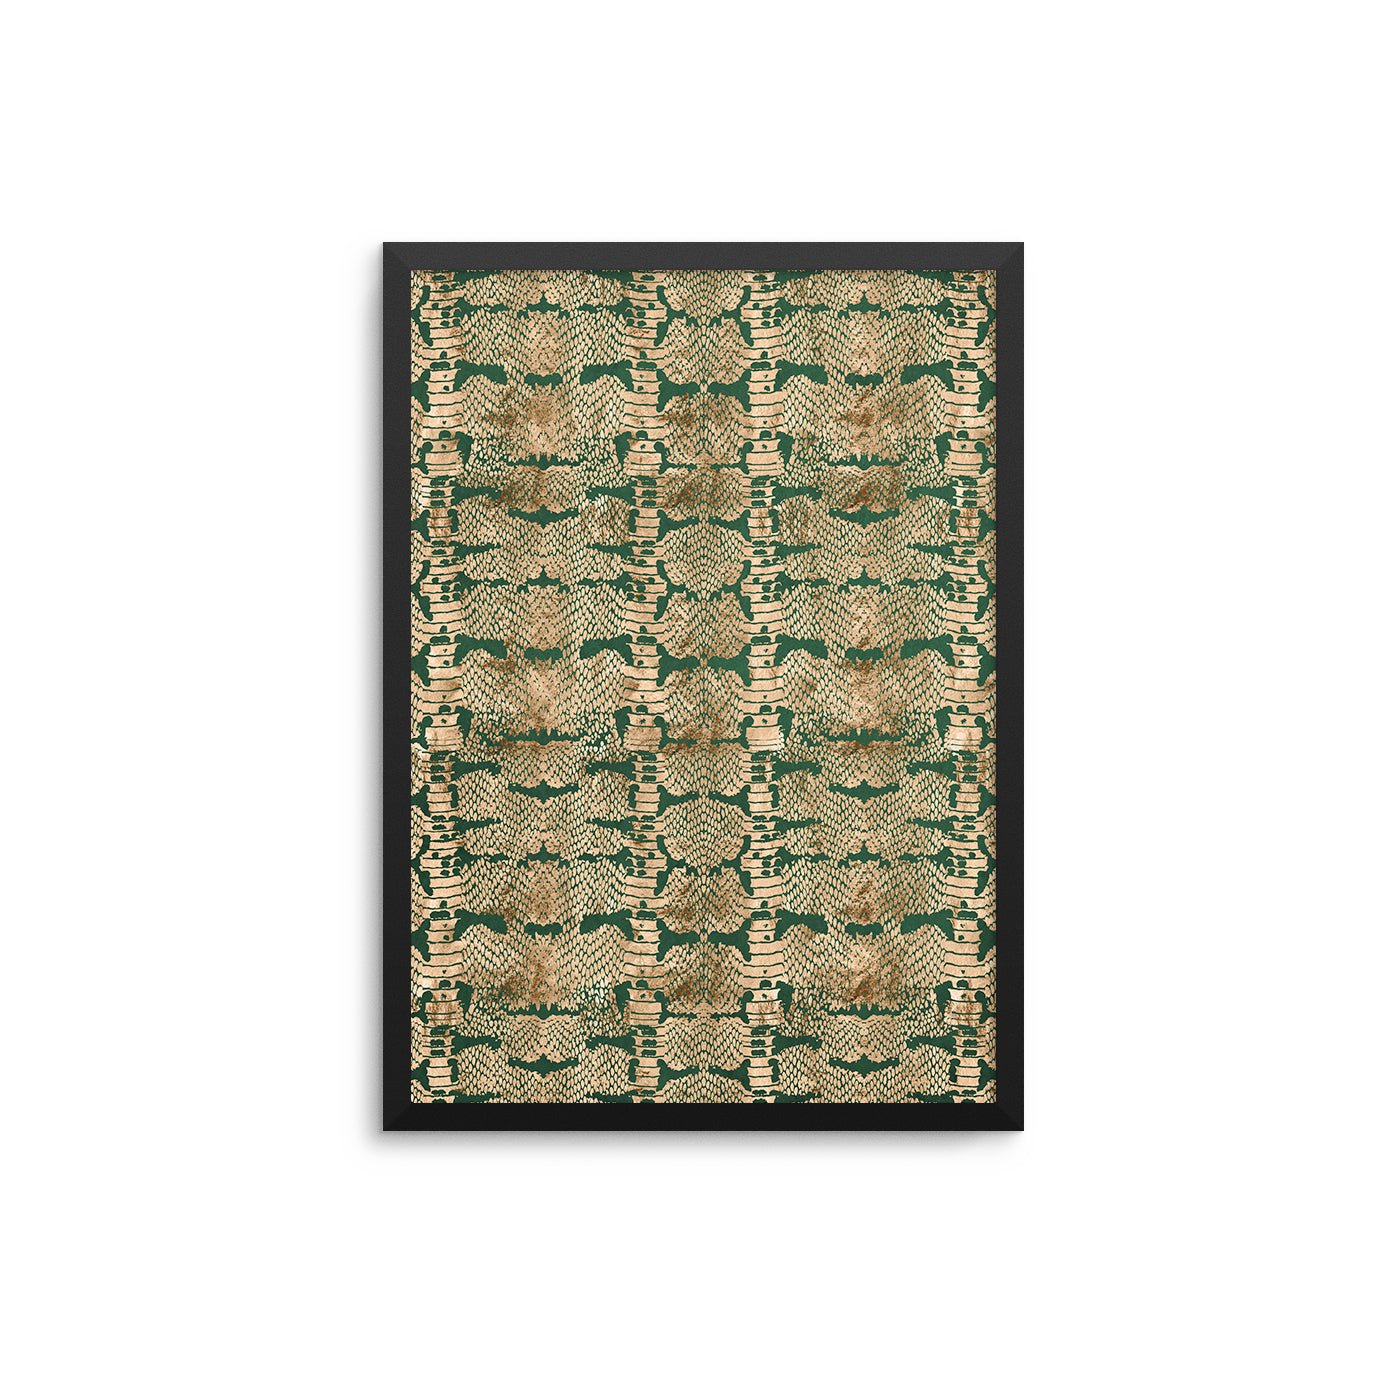 Green Gold Python - D'Luxe Prints